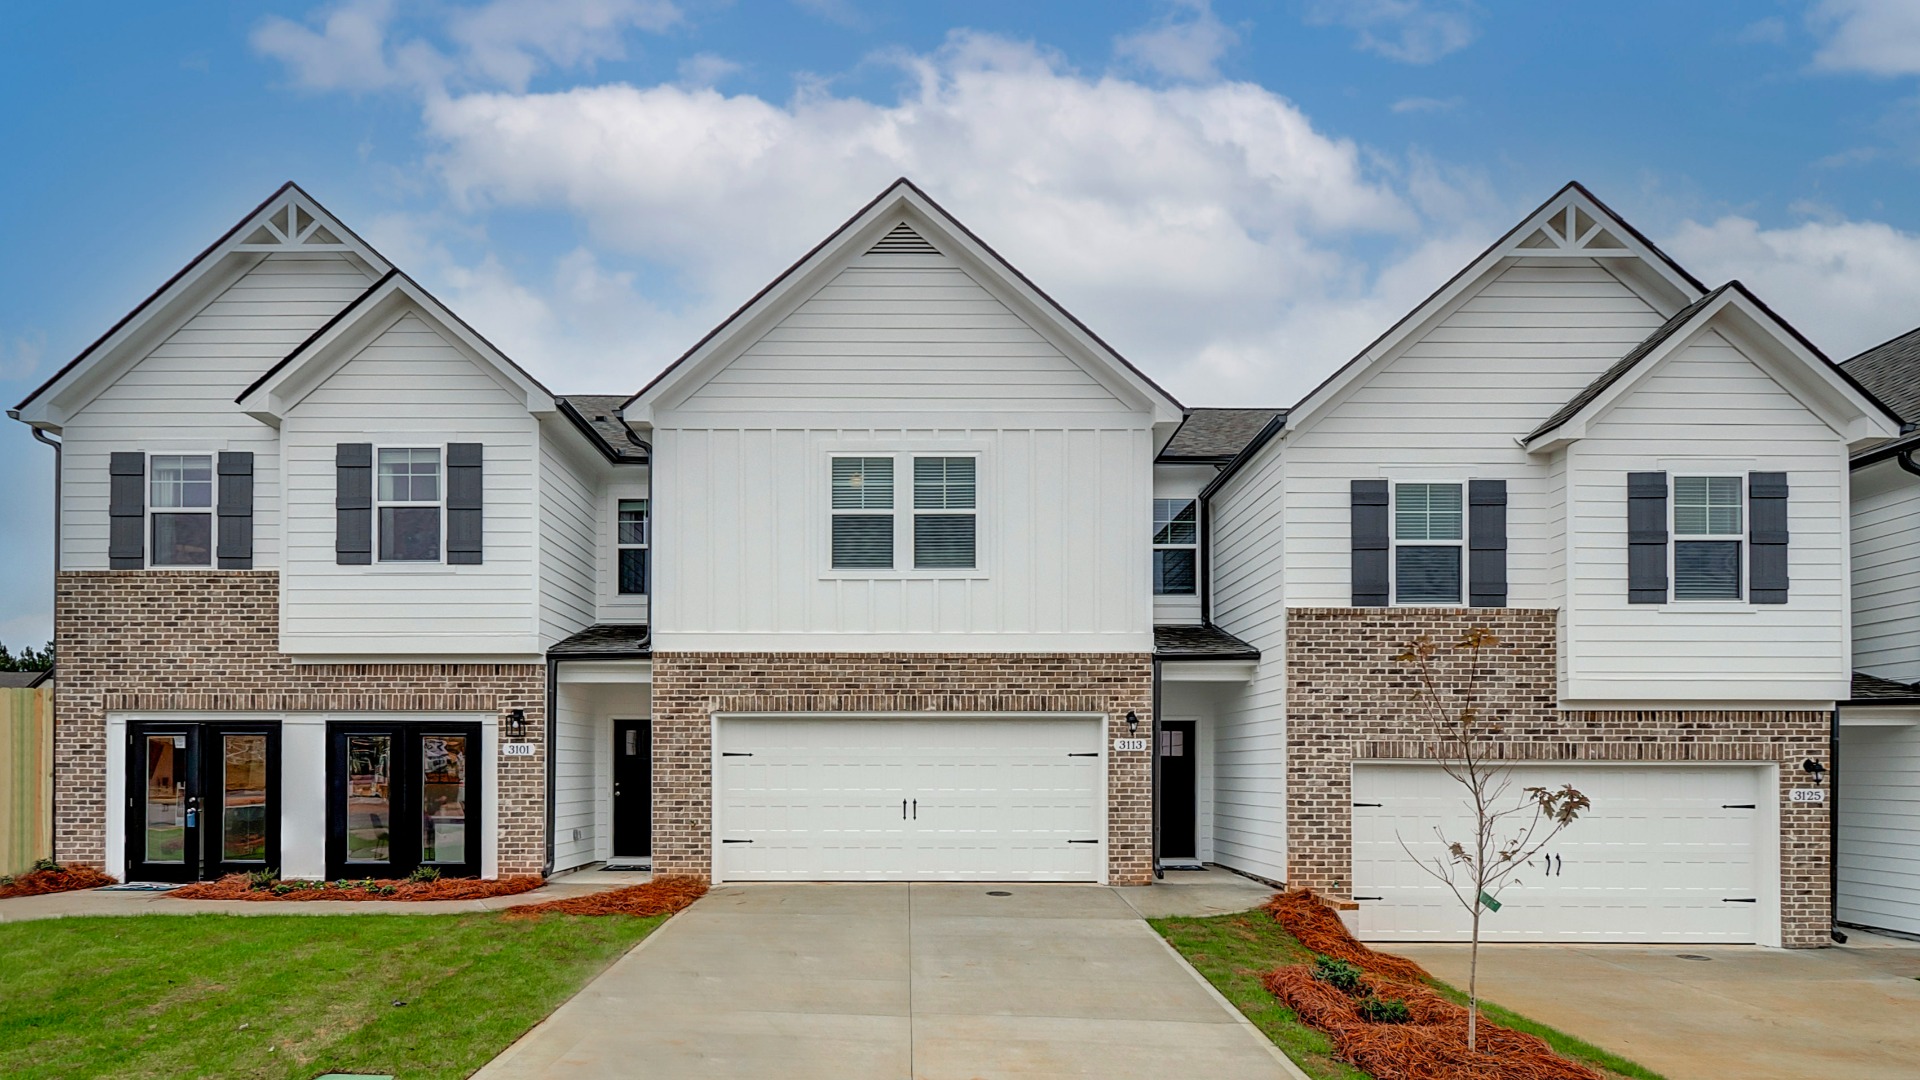 New Homes for Sale in Lee County, AL | Alabama Home Builders | DRB Homes